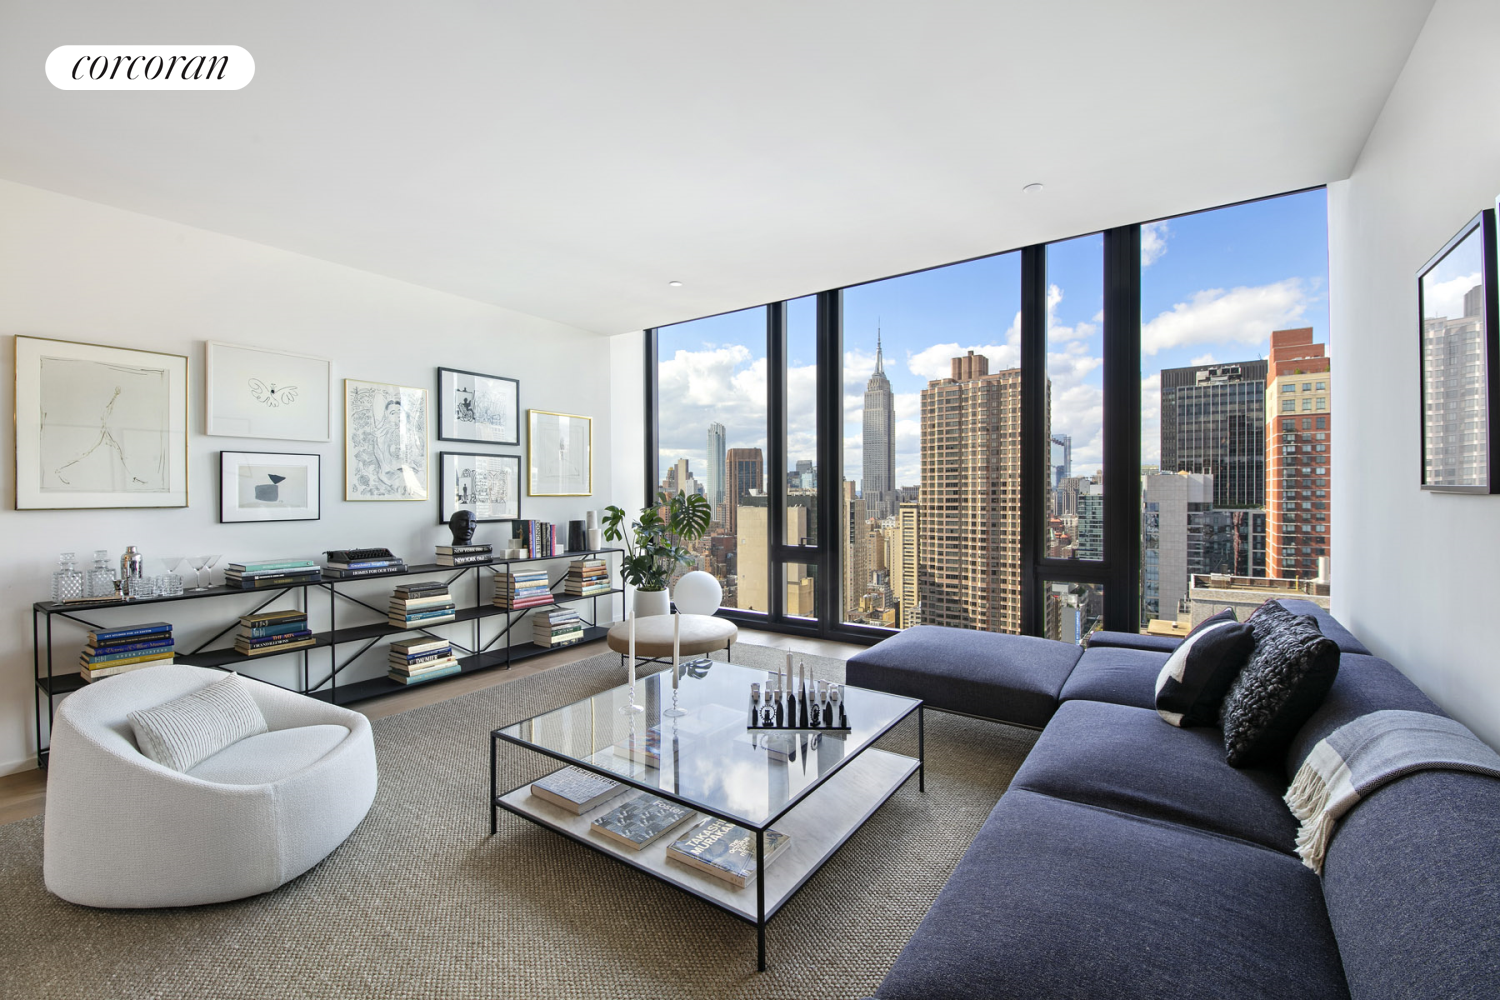 695 1st Avenue 35F, Murray Hill, Midtown East, NYC - 2 Bedrooms  
2.5 Bathrooms  
3 Rooms - 